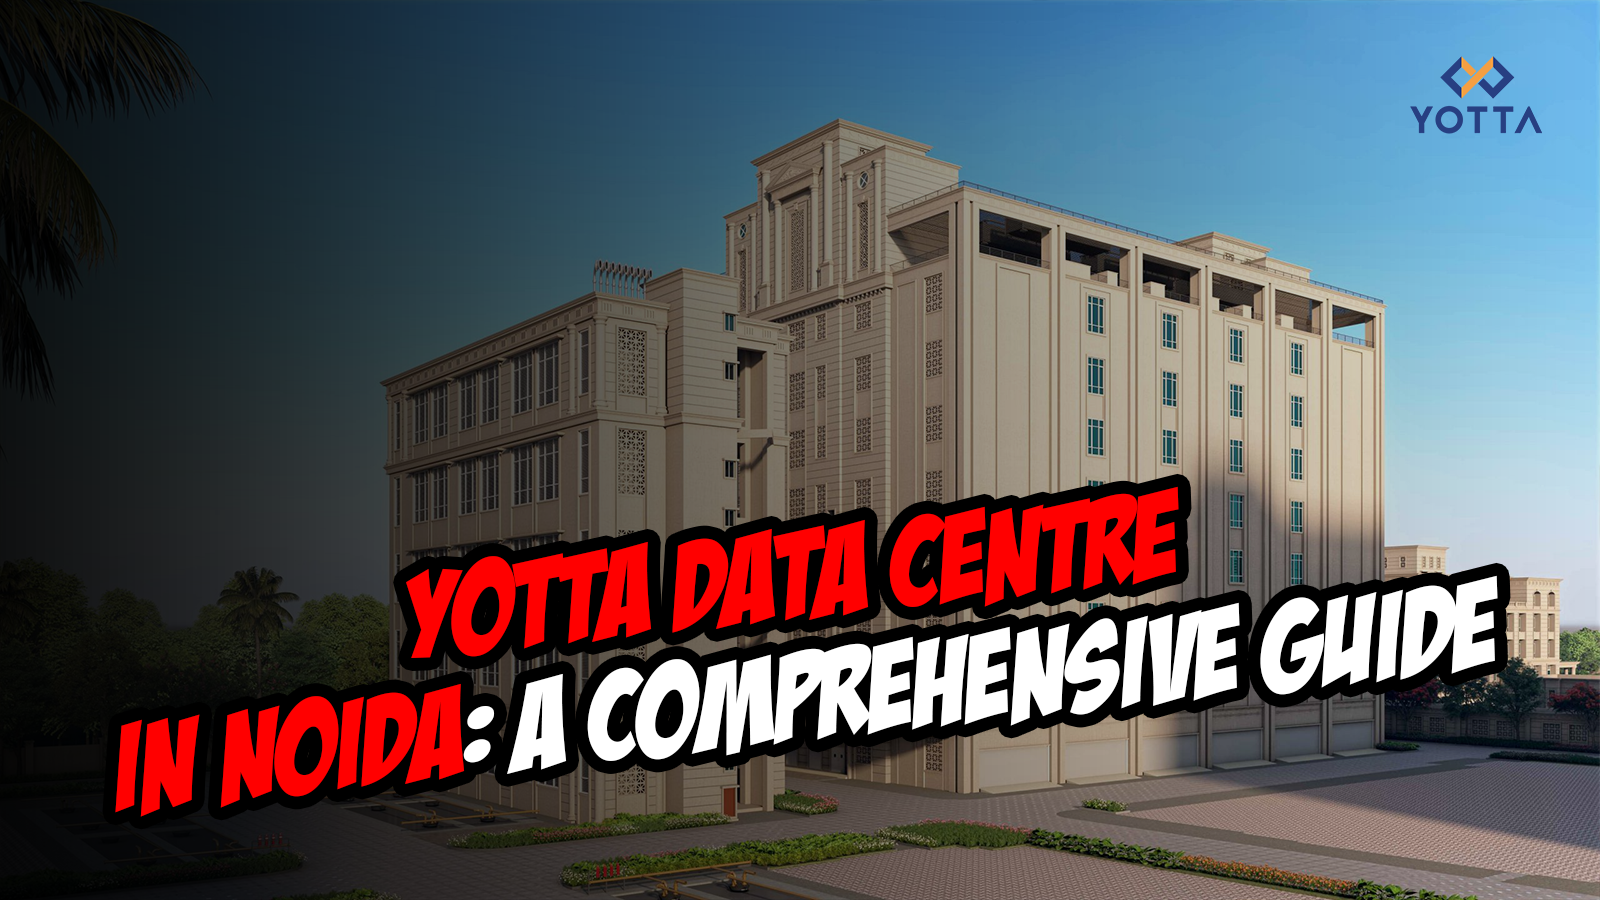 Servers to be Installed in Yotta Data Centre in Noida: A Comprehensive Guide